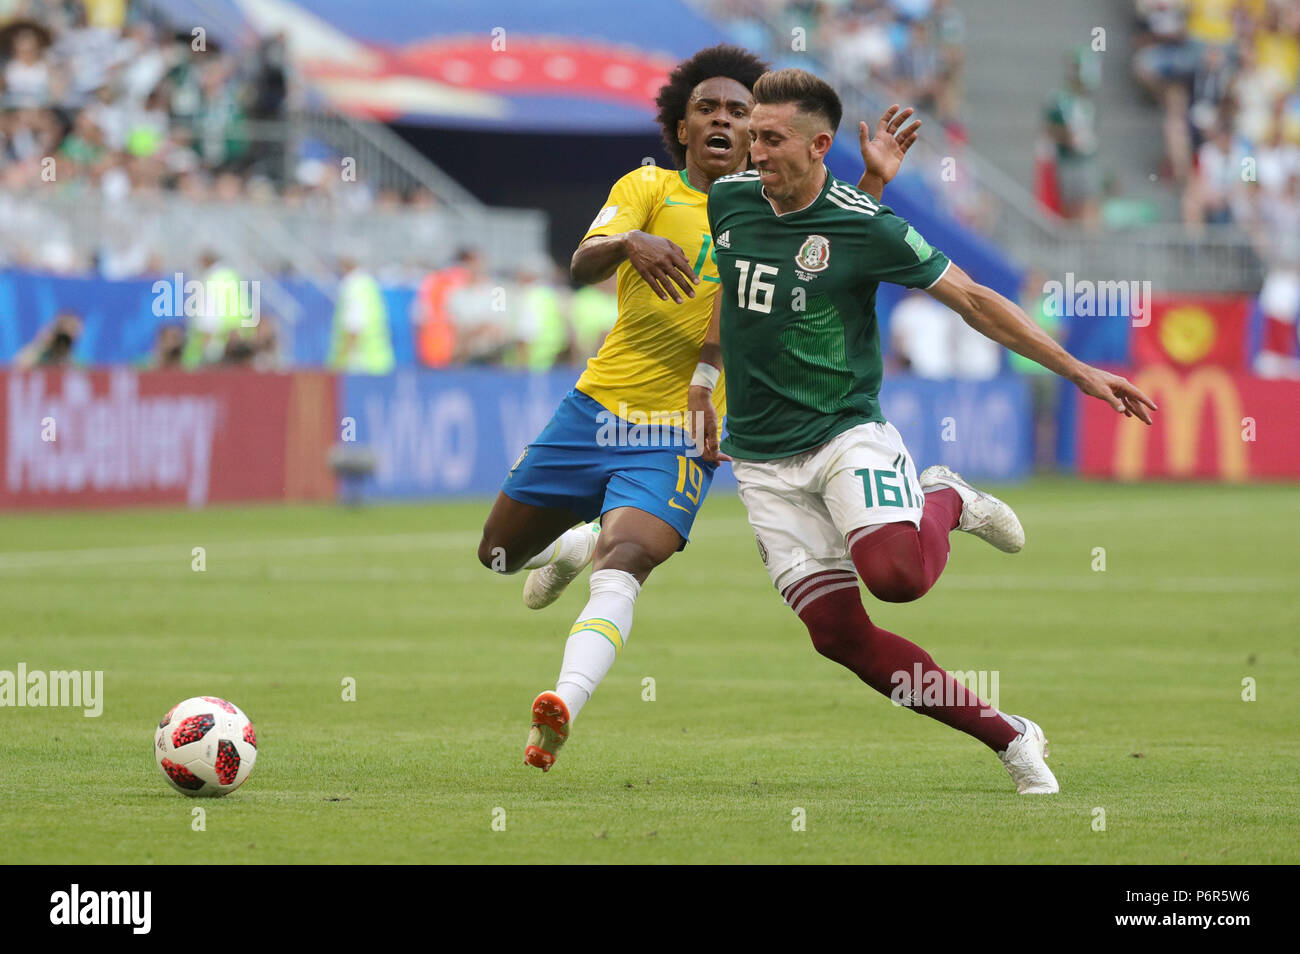 Samara, Russia. 02nd July, 2018. Soccer, World Cup 2018, Final round - round of 16: Mexico vs. Brazil at the Samara stadium: Brazil's Willian and Mexico's Hector Herrera vying for the ball. Credit: Christian Charisius/dpa/Alamy Live News Stock Photo